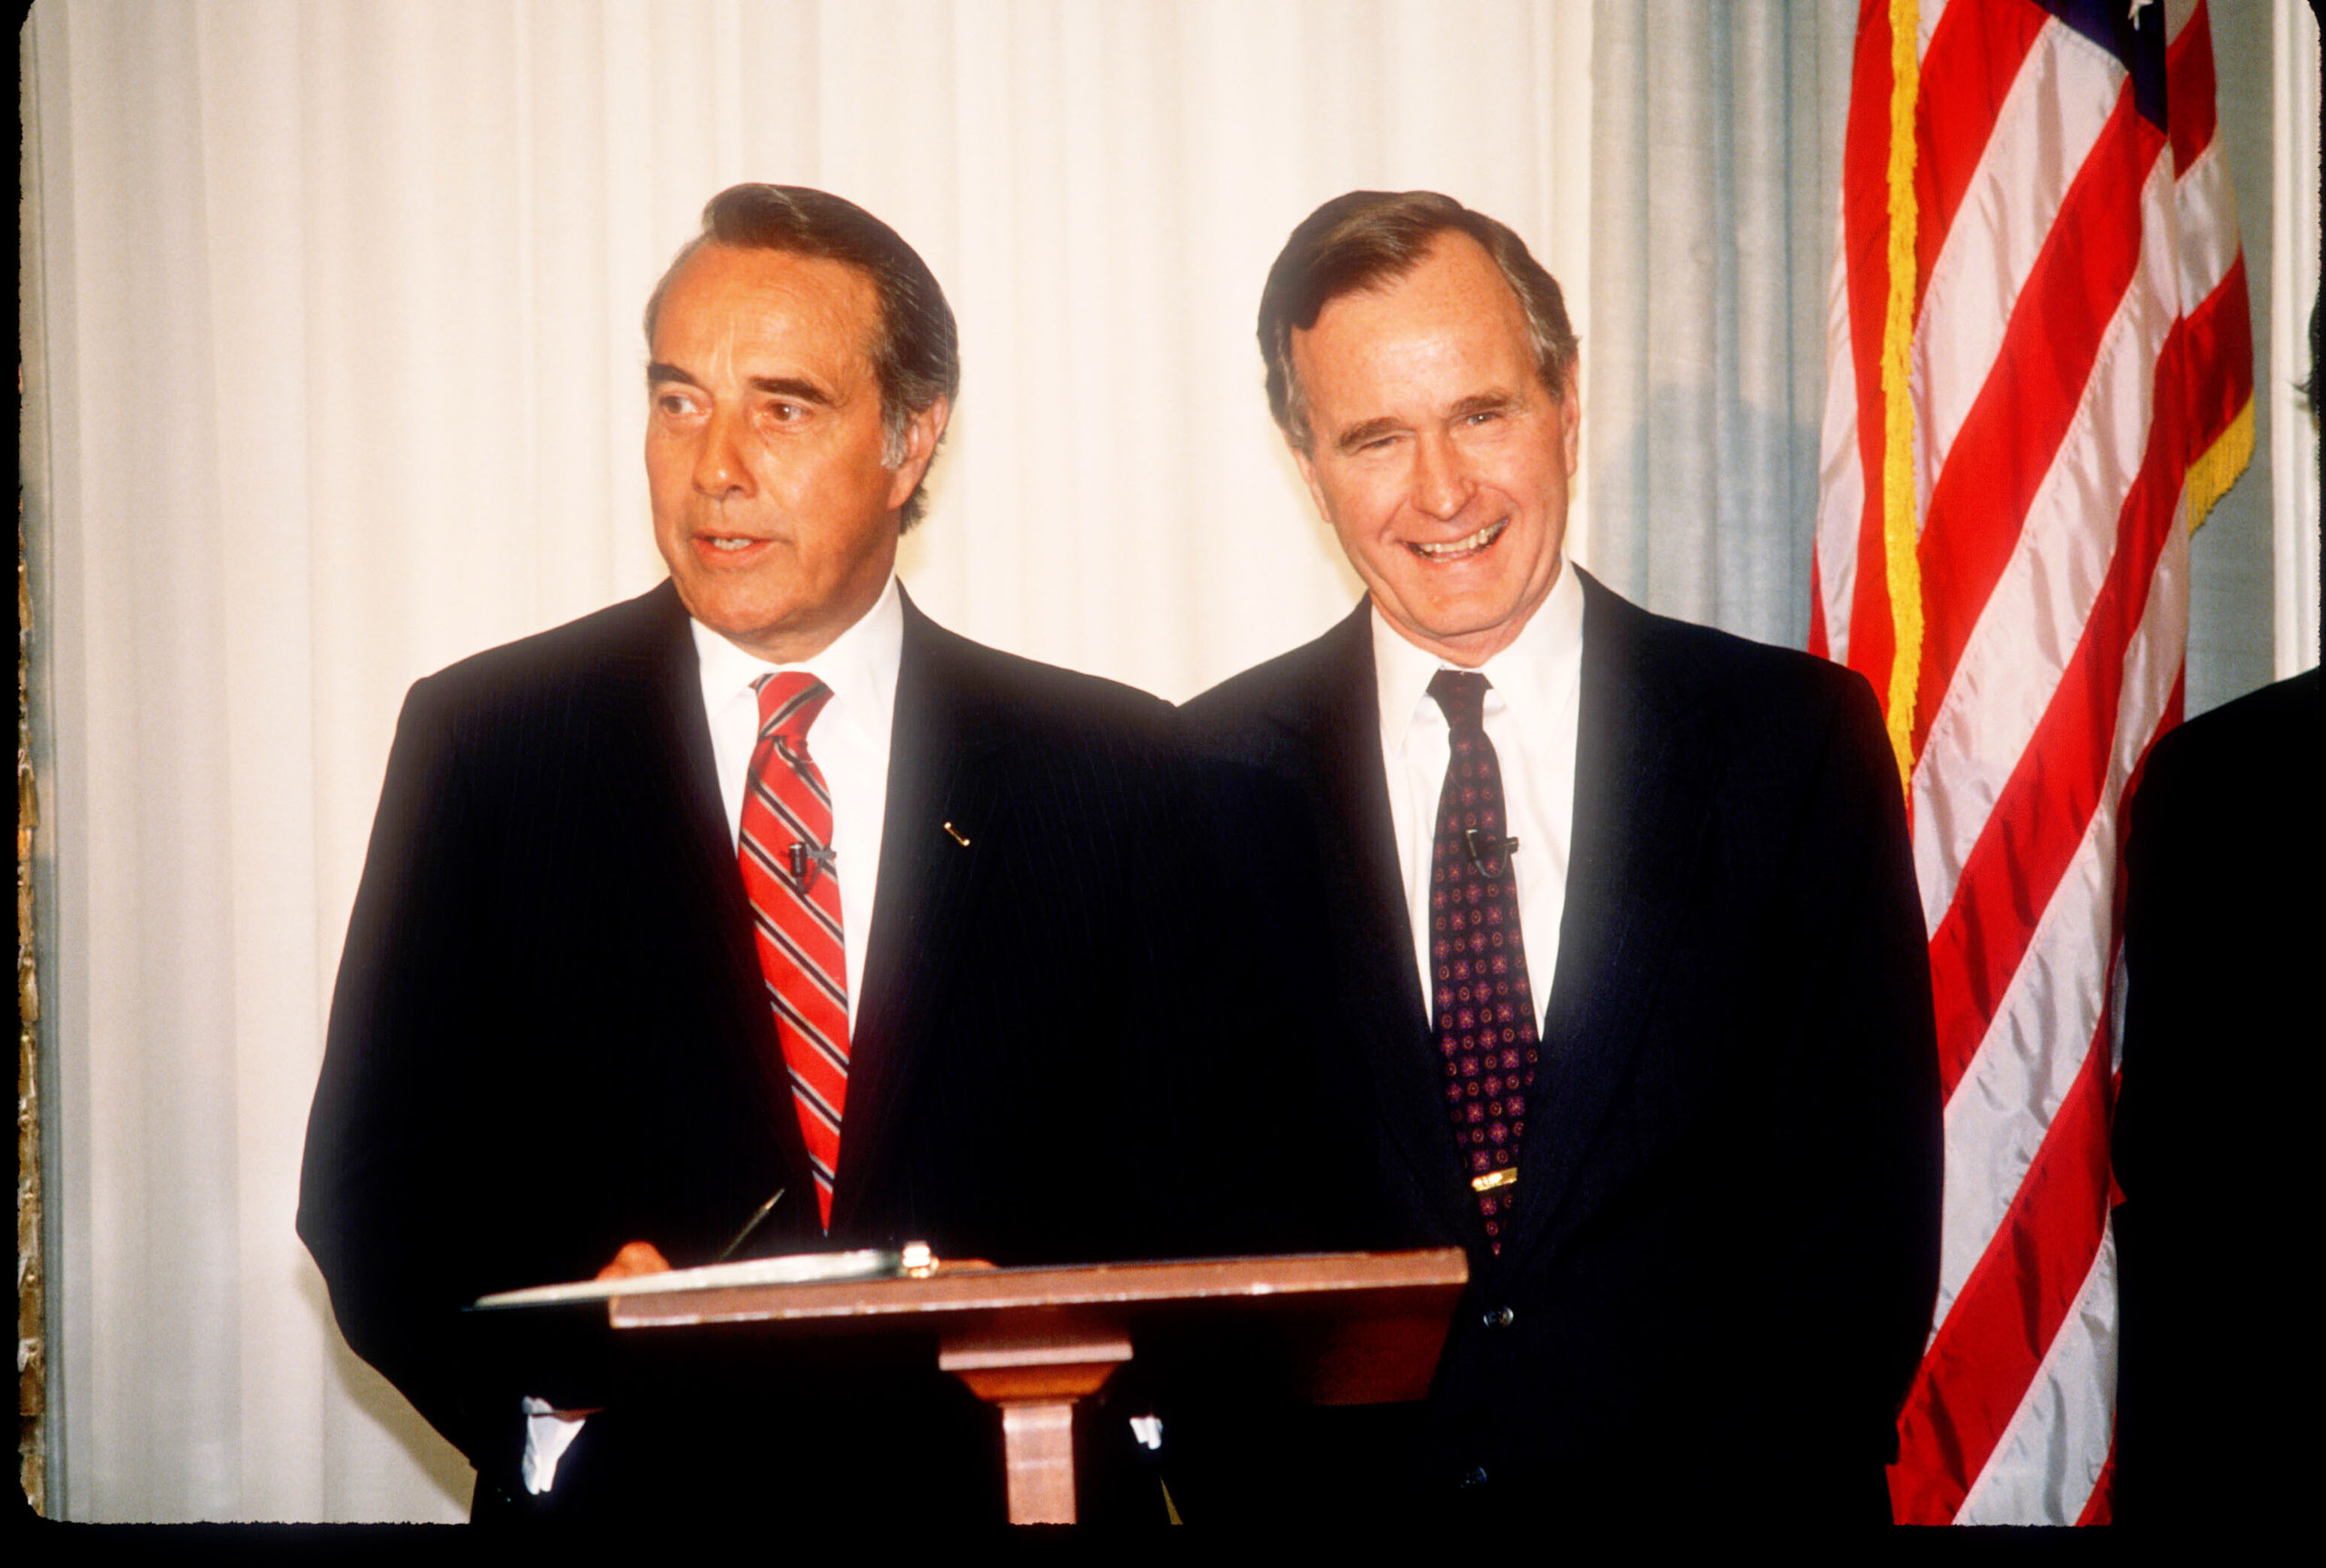 George Herbert Walker Bush stands with Bob Dole in Washington, D.C., on April 15, 1988. (Cynthia Johnson—Liaison/Getty Images)